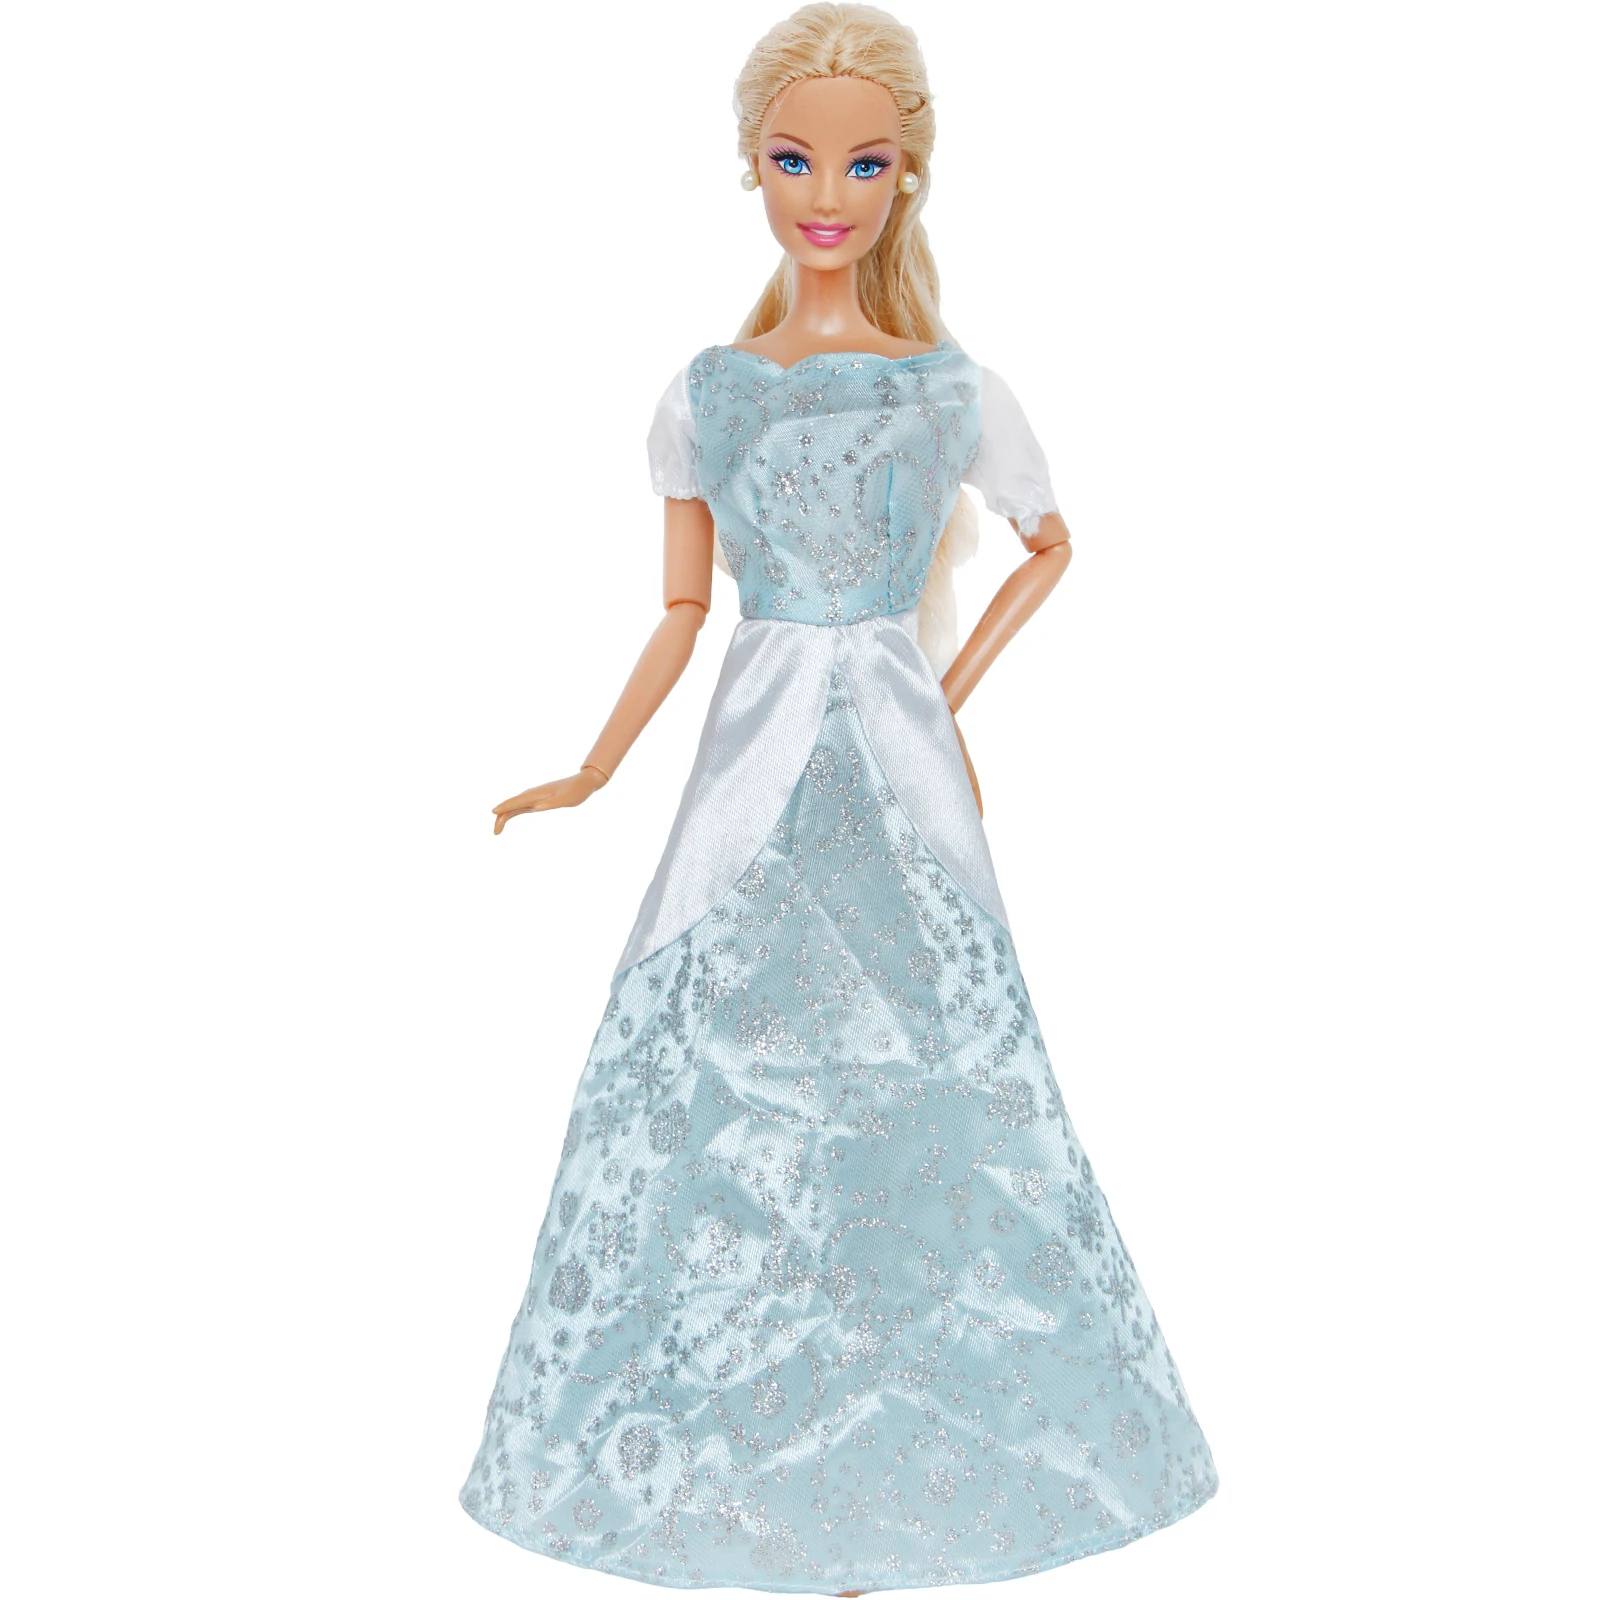 Fashion Fairy Tale Princess Dress Wedding Gown Shiny Party Outfit Clothes for Barbie Doll 12'' Pretend Play Kid Dollhouse Toys | - Фото №1